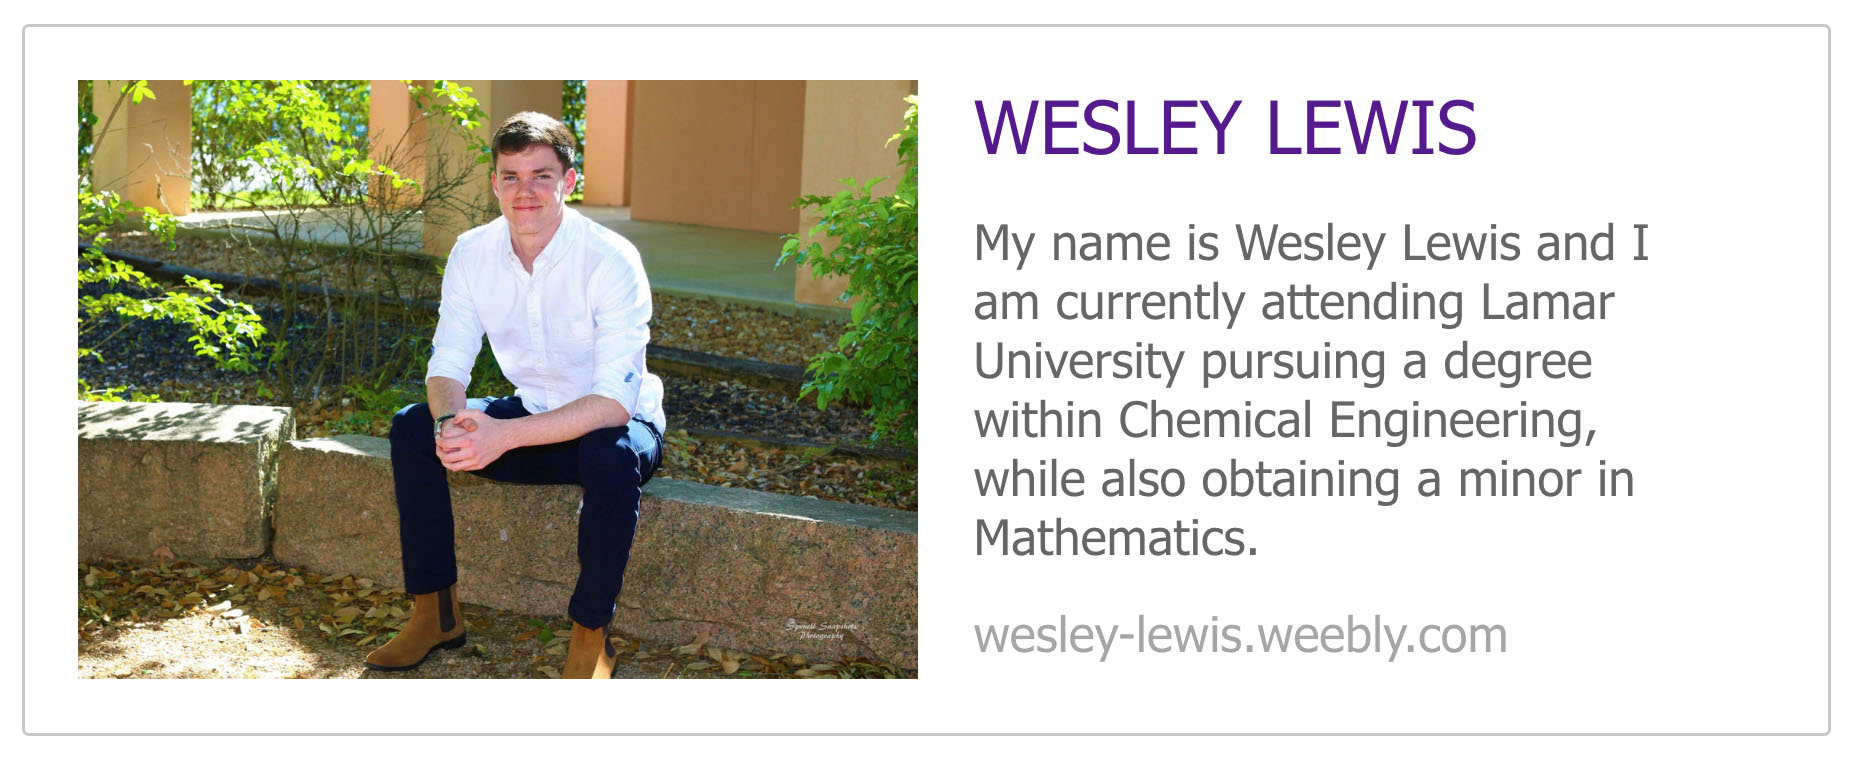 Wesley Lewis My name is Wesley Lewis and I am currently attending Lamar University pursuing a degree within Chemical Engineering, while also obtaining a minor in Mathematics.  wesley-lewis.weebly.com